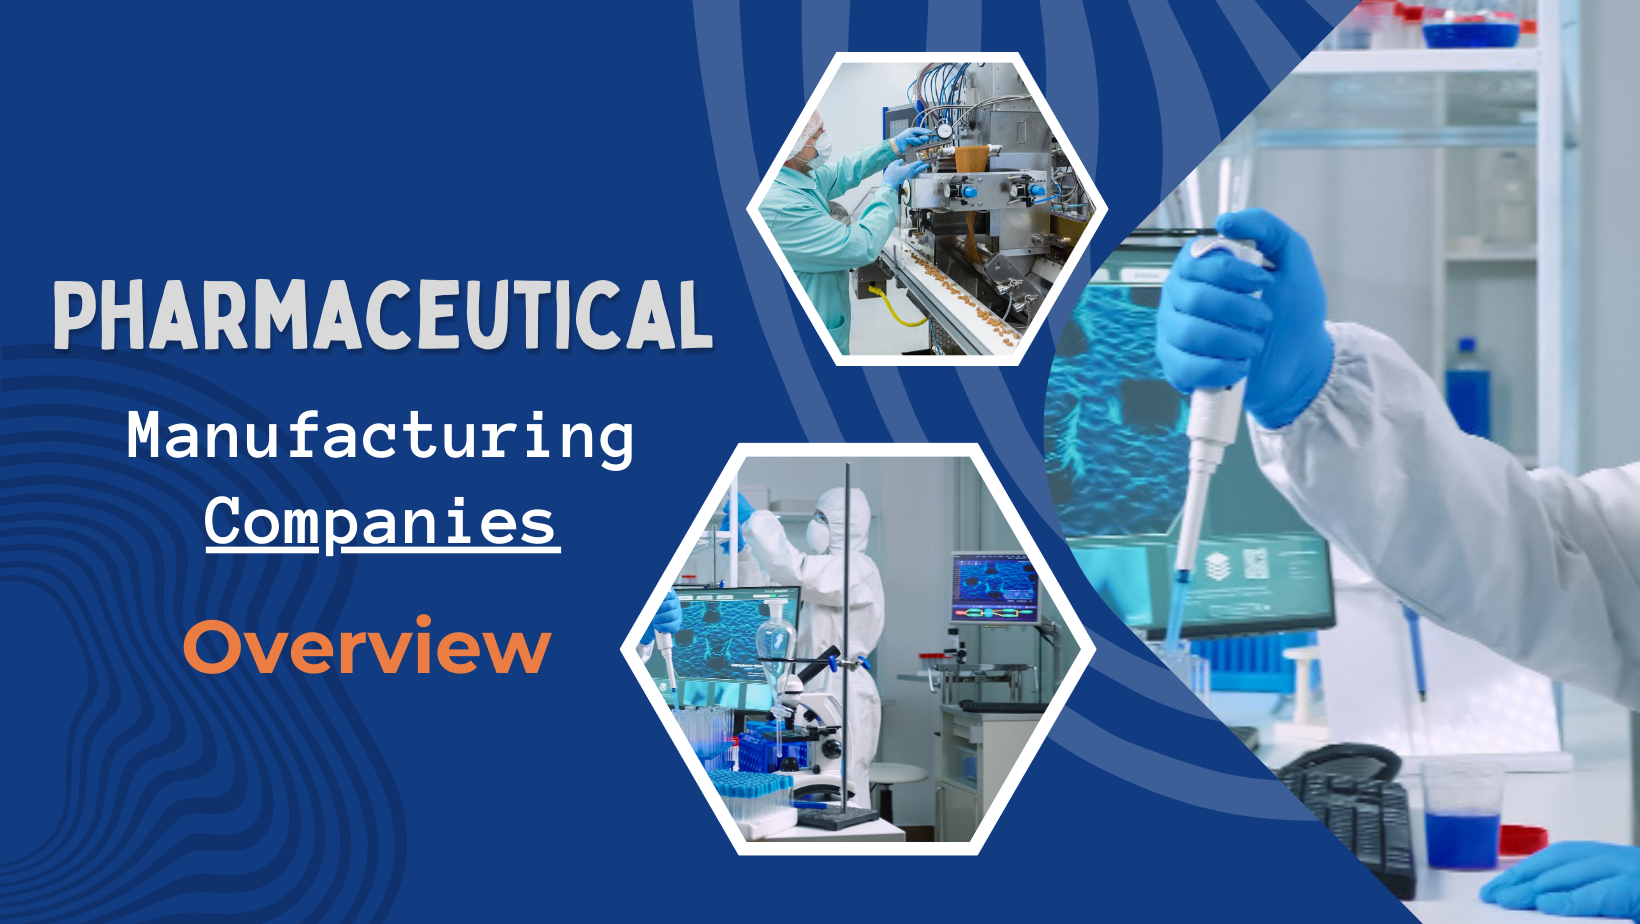 Pharmaceutical Manufacturing Companies Overview